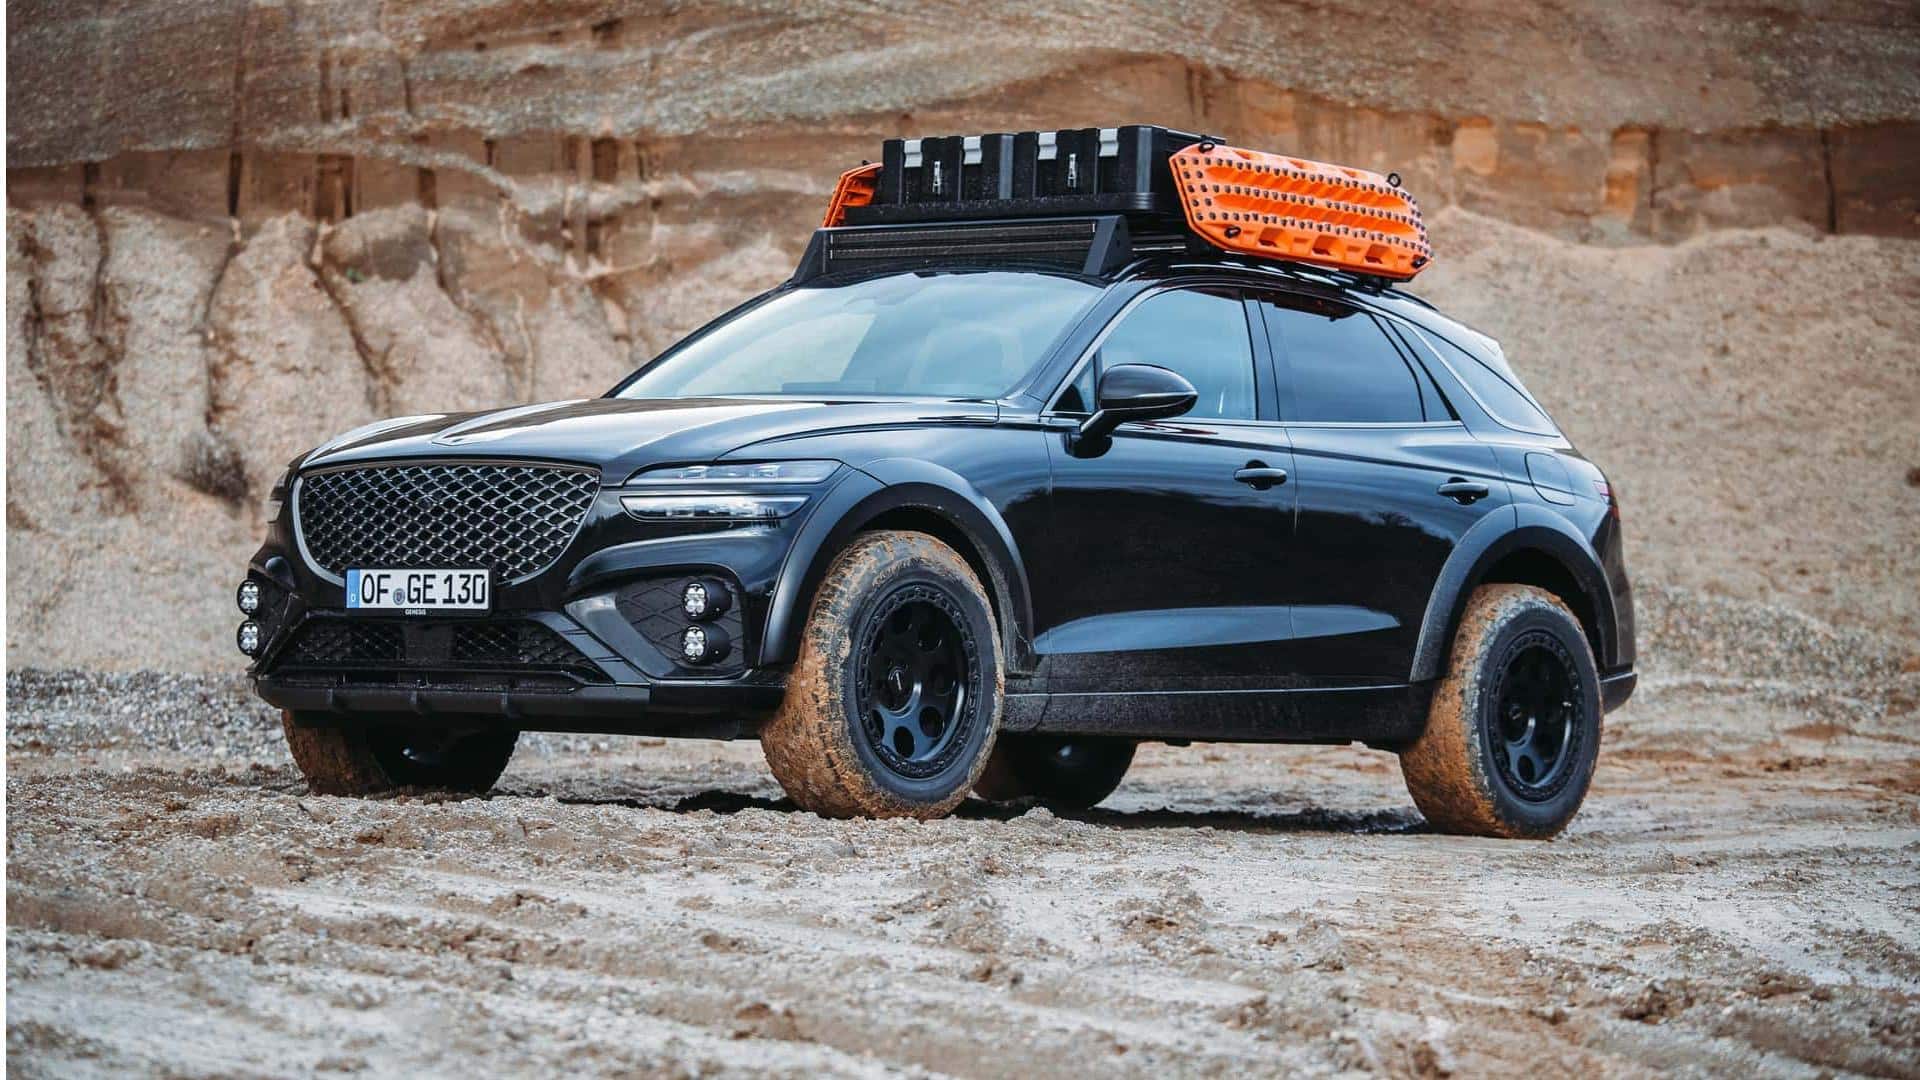 Genesis blends luxury and off-road capabilities in this GV70 concept